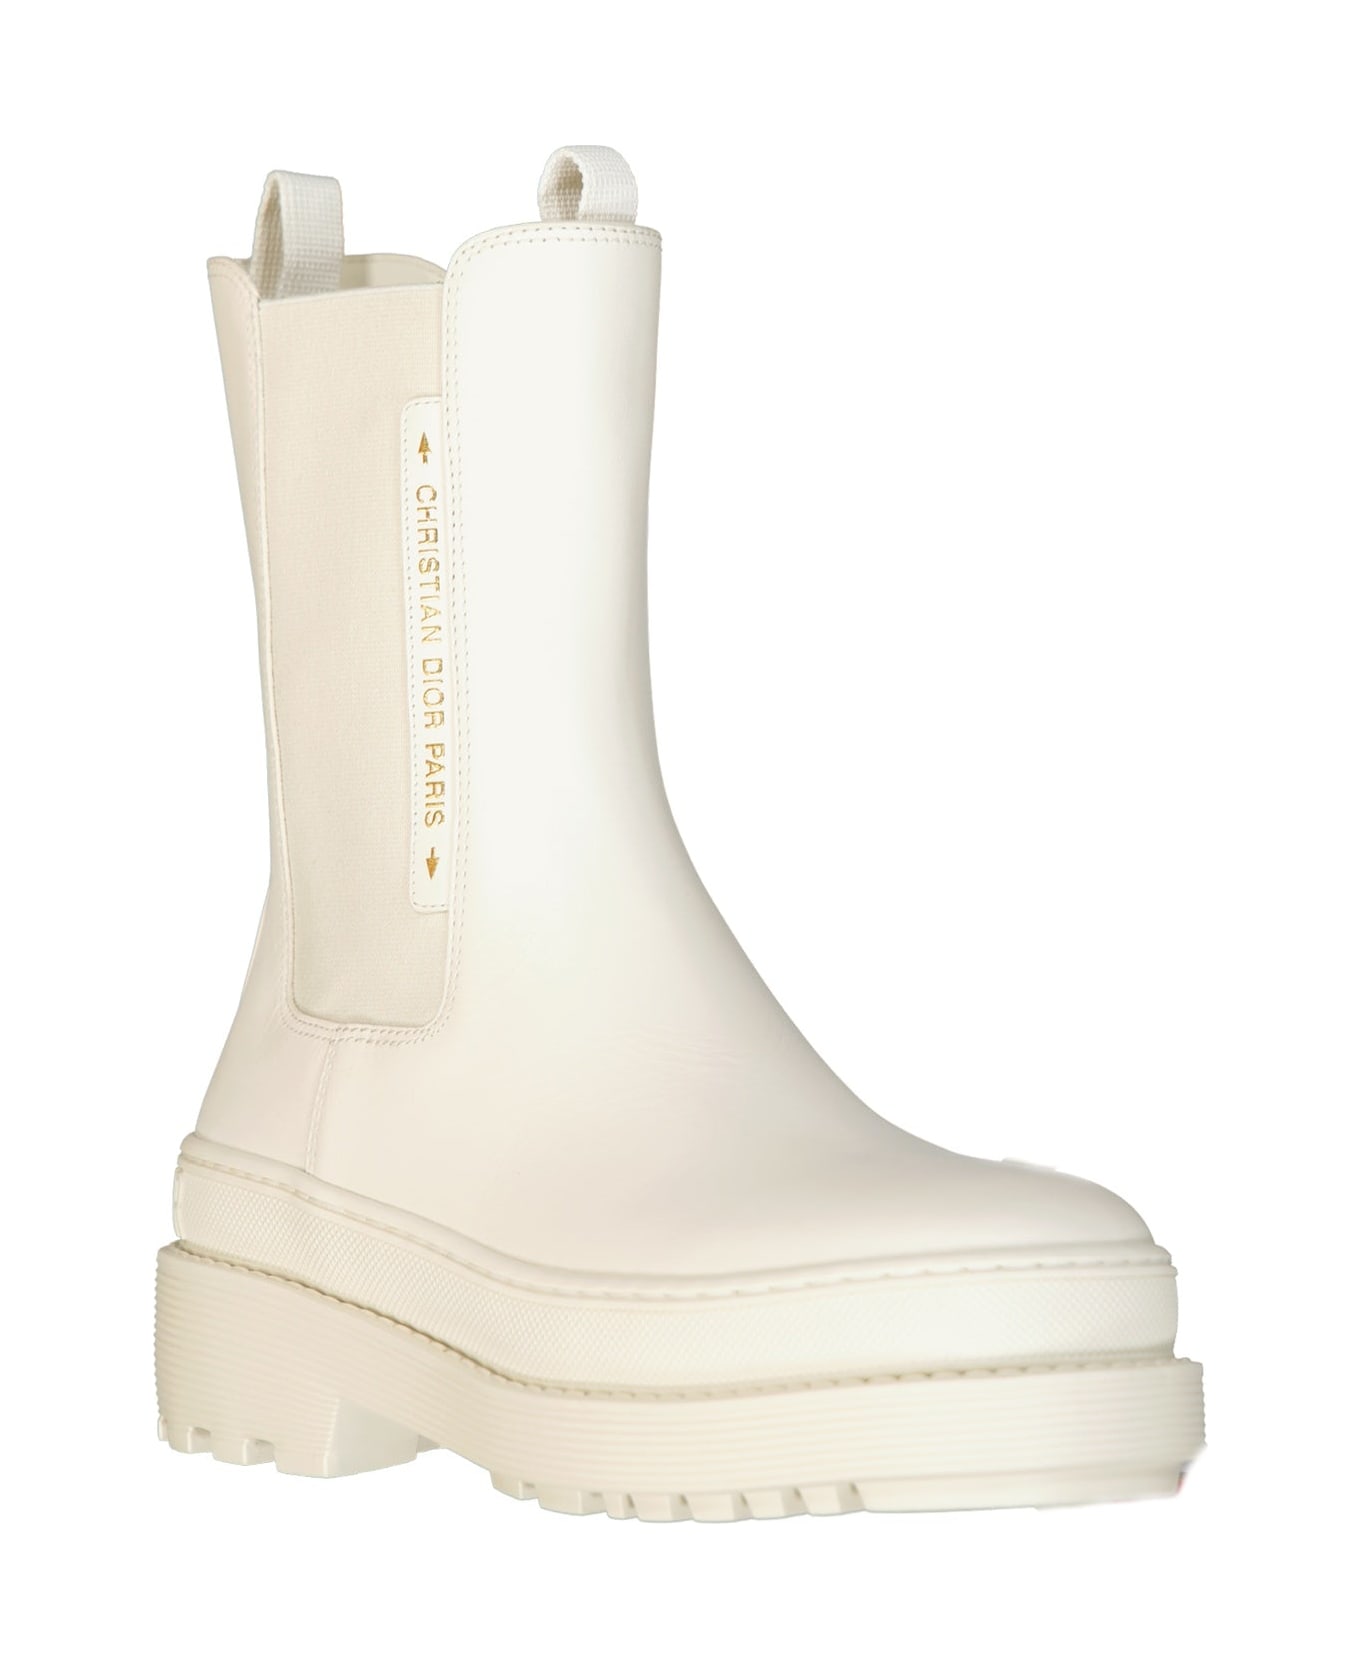 Dior Leather Boots - White